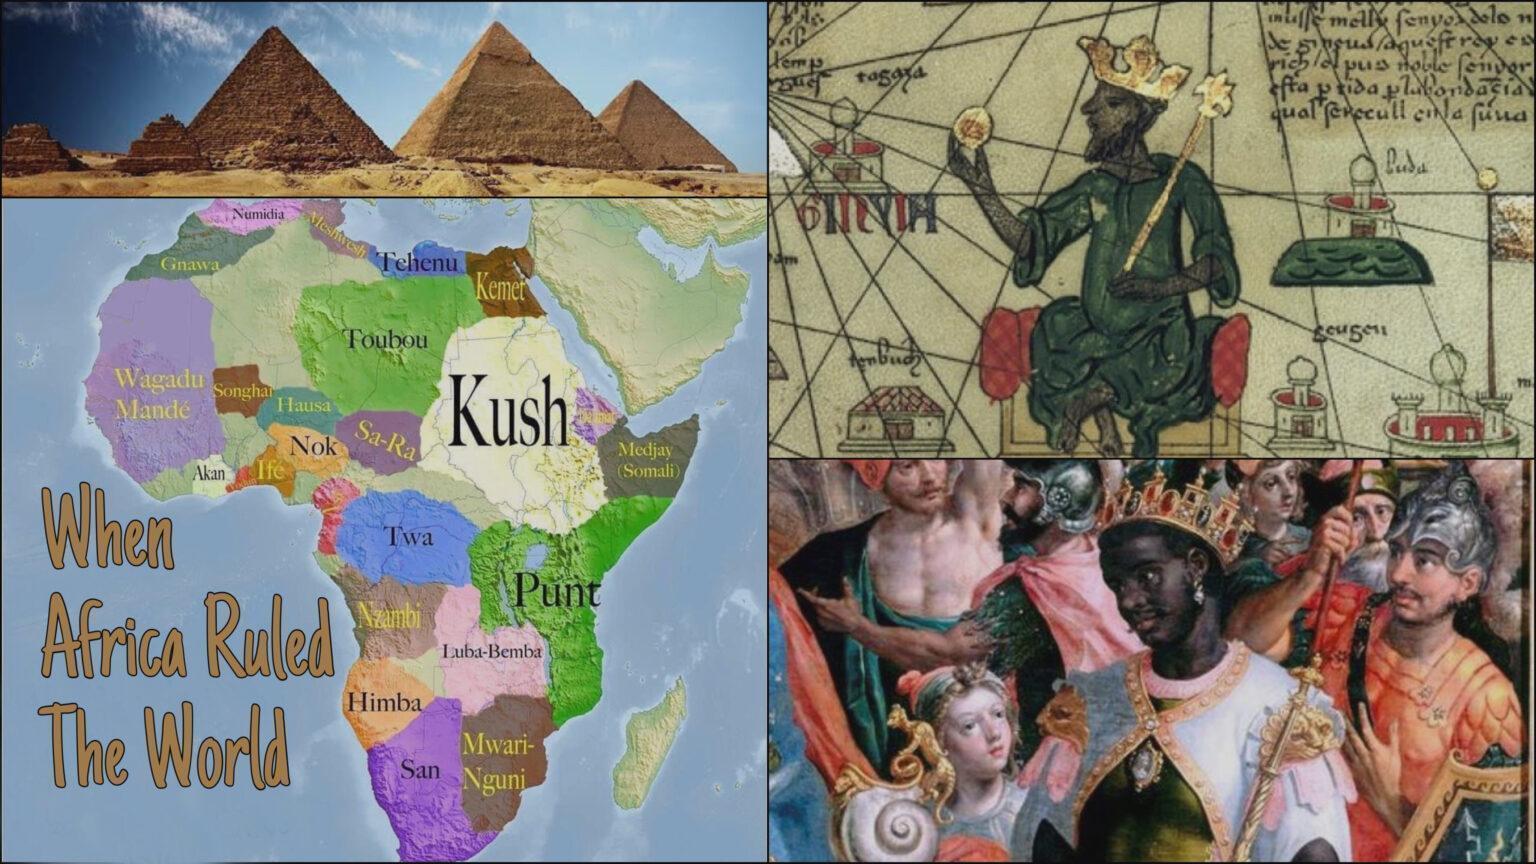 Africa Ruled The World For 15,000 Years & Civilized Mankind | The